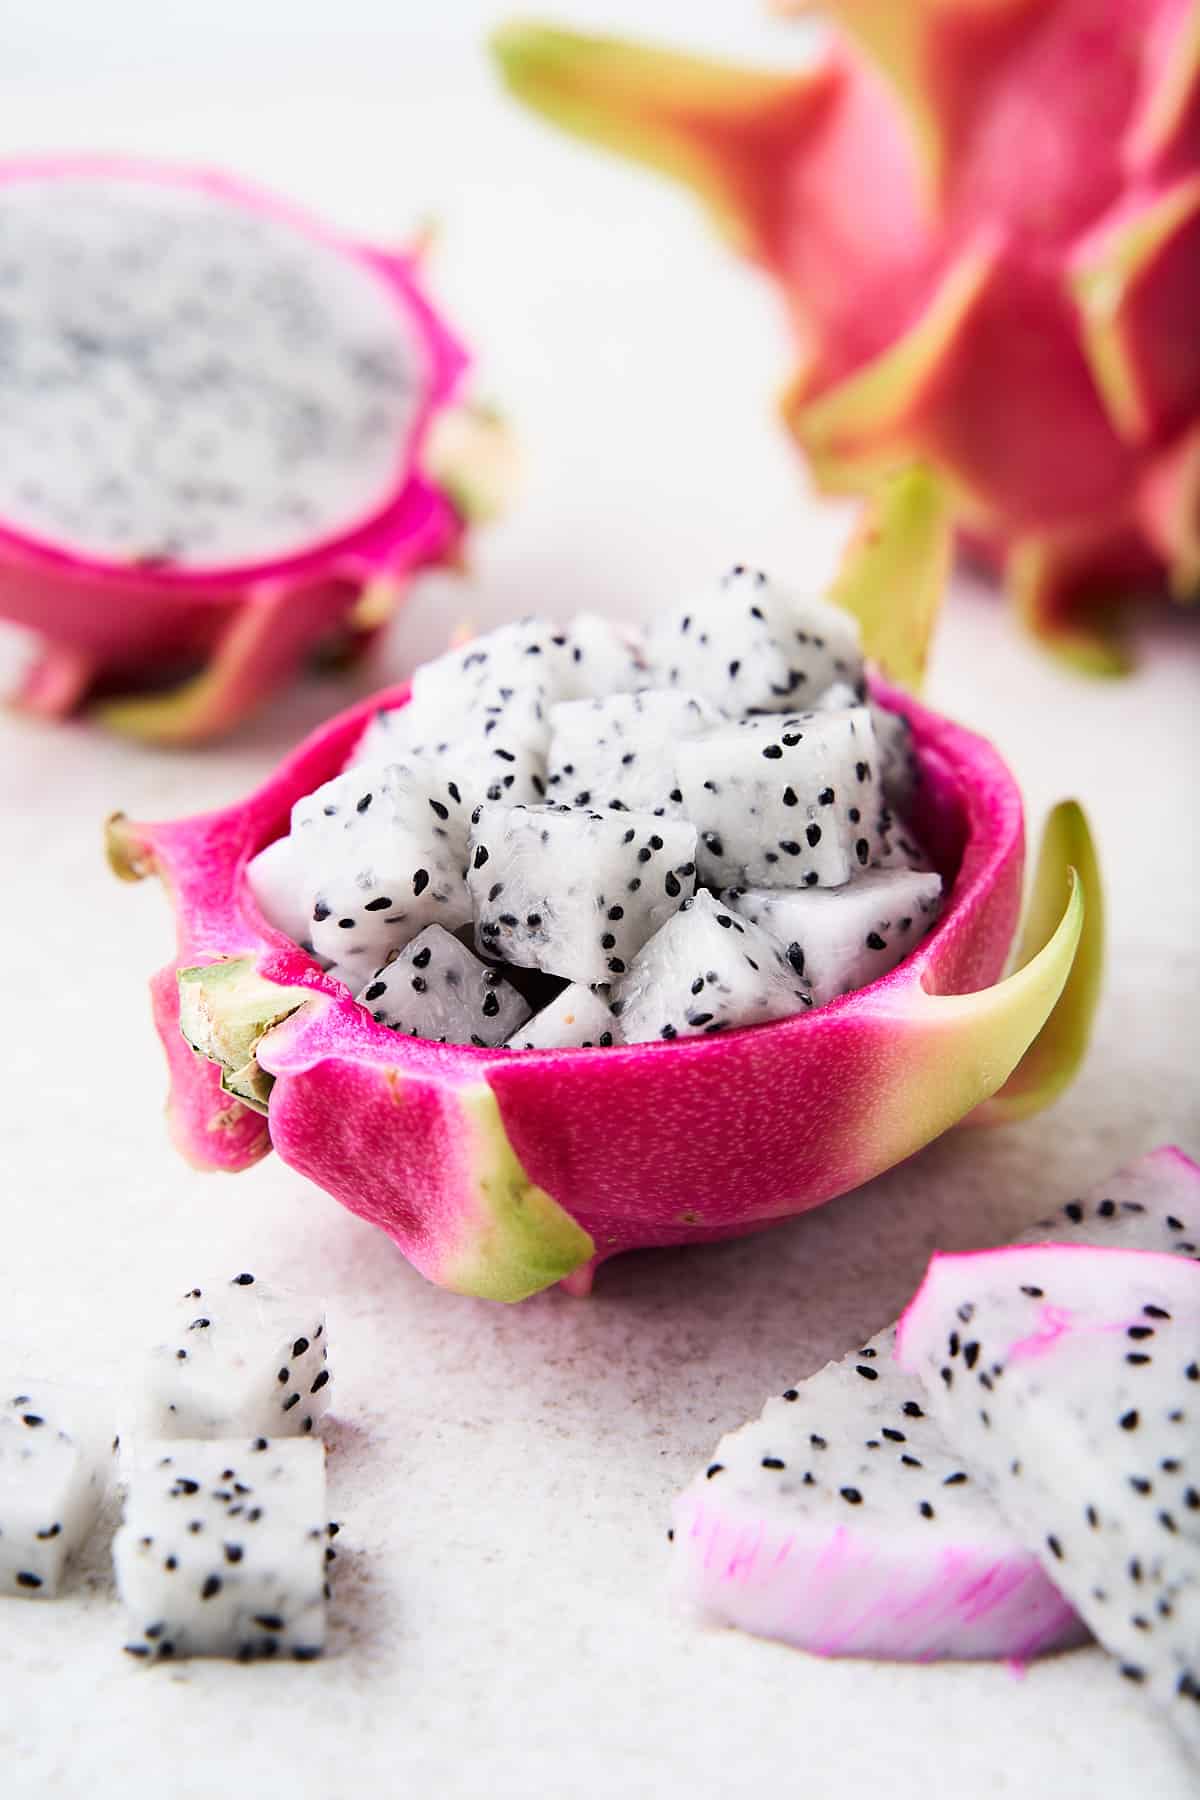 How to cut dragonfruit